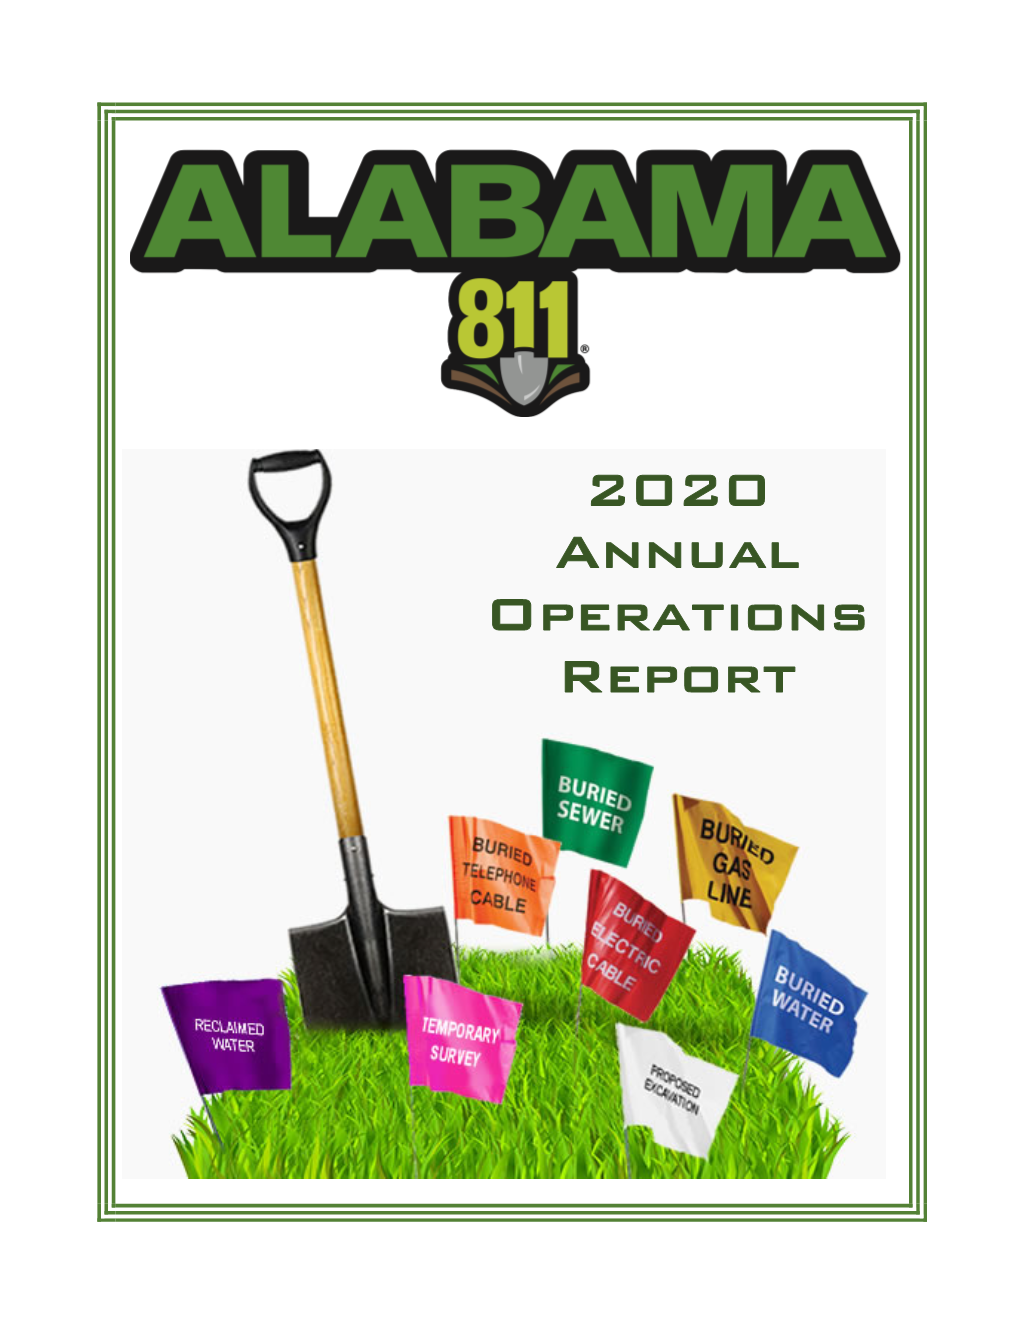 2020 Annual Operations Report